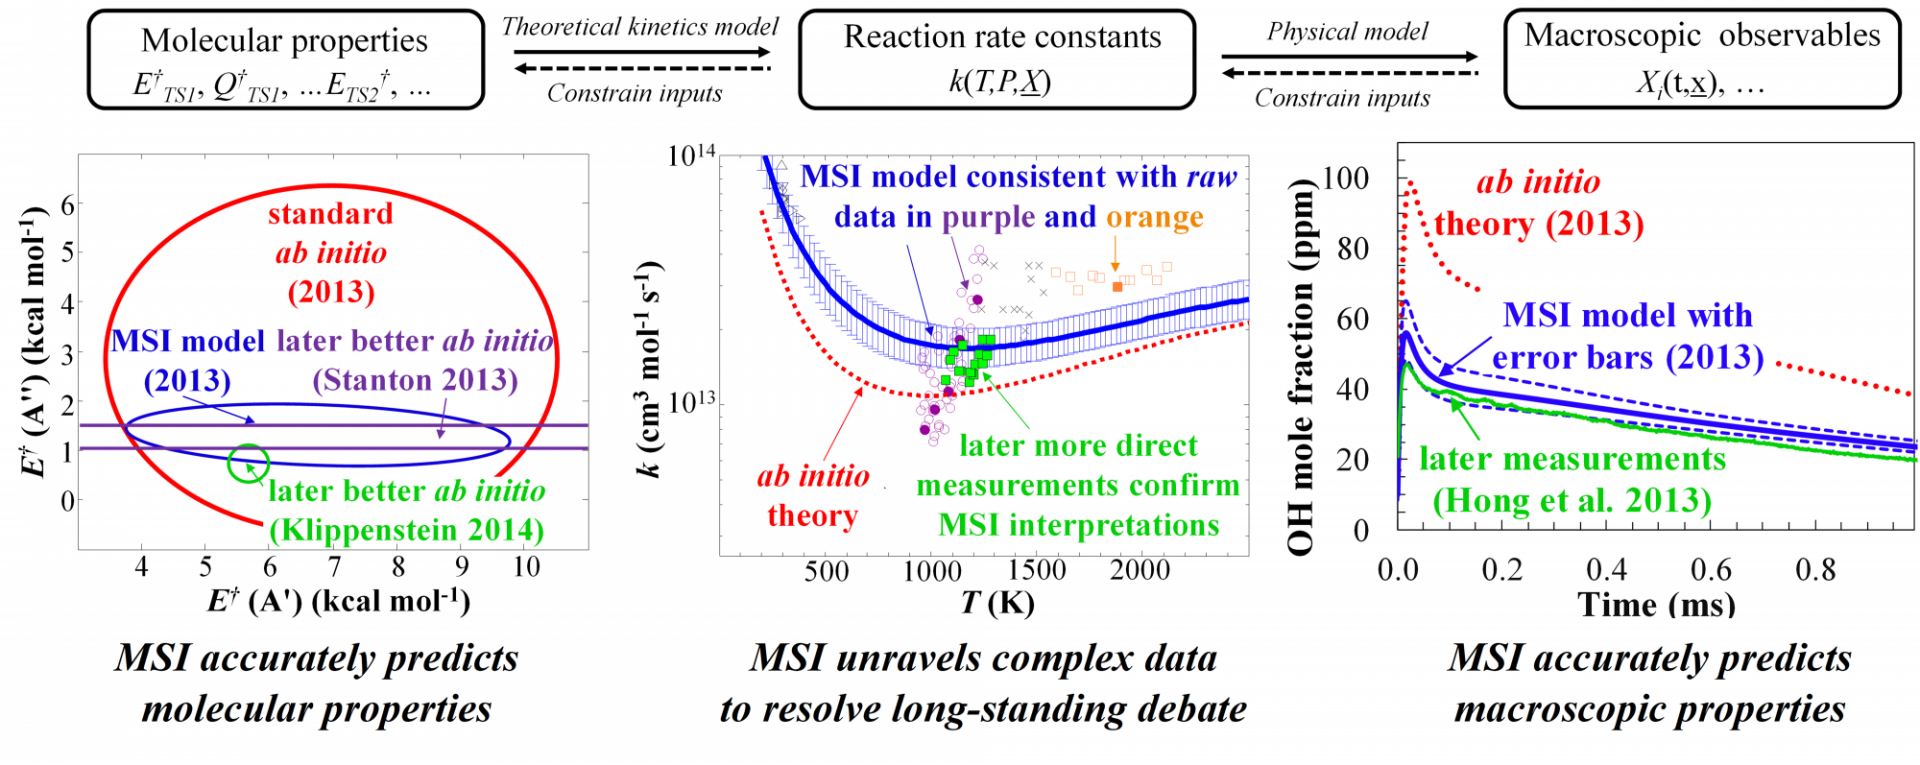 Top: In MSI, theoretical kinetics models relate active molecular properties to rate constants.  Kinetic models, consisting of these rate constants, are then combined with physical models and active physical model parameters for each experiment to predict experimental observables.  Data available at each scale can then be used to impose constraints on the active parameters.
Bottom: MSI unravels complex data and accurately predicts behavior across multiple scales.